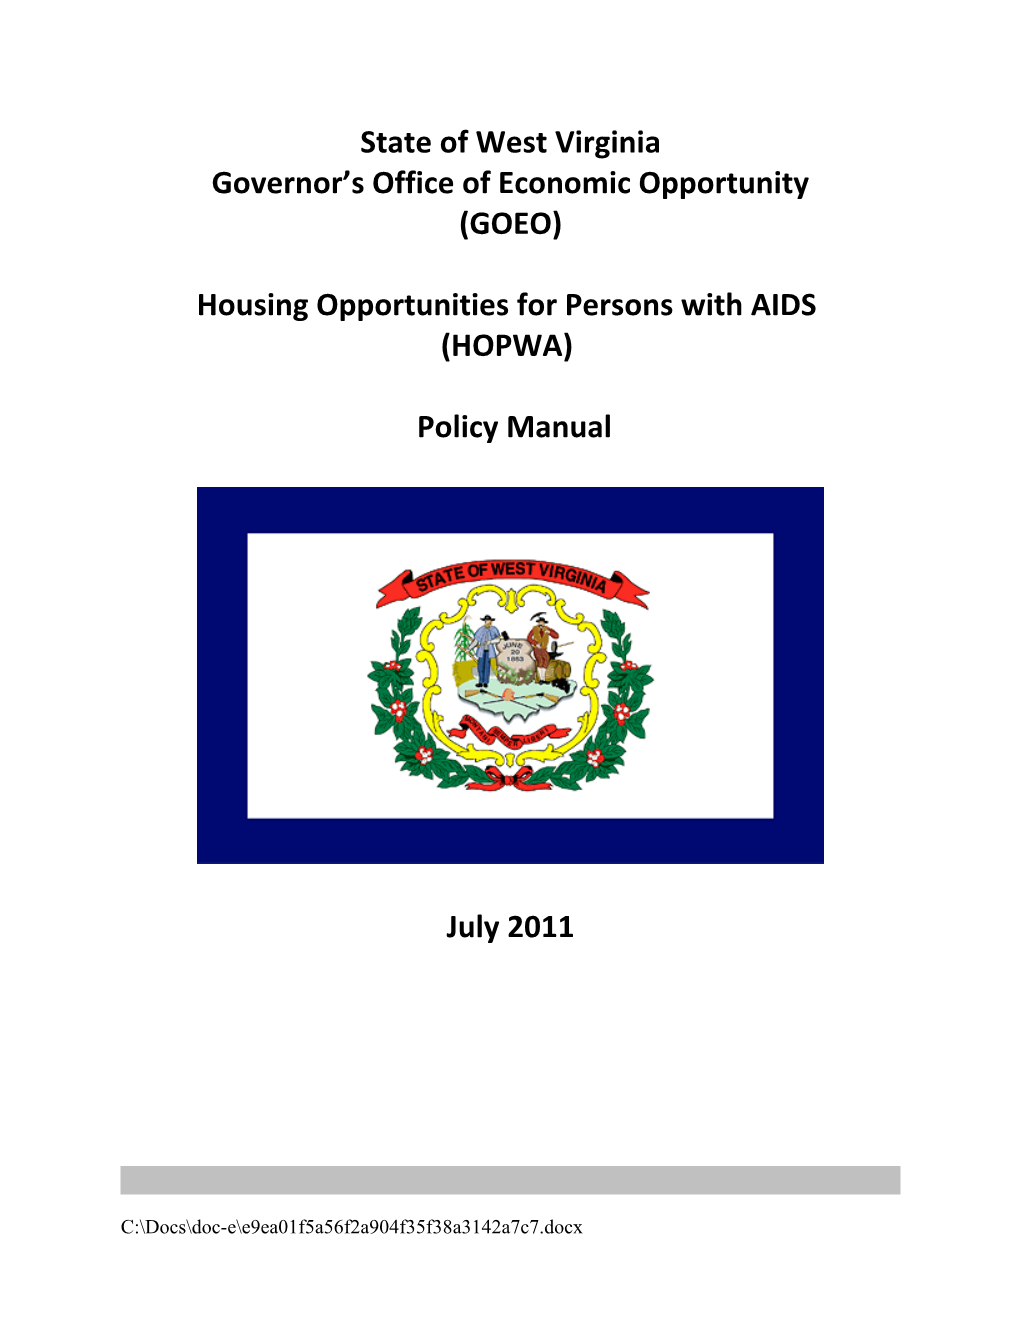 Governor S Office of Economic Opportunity